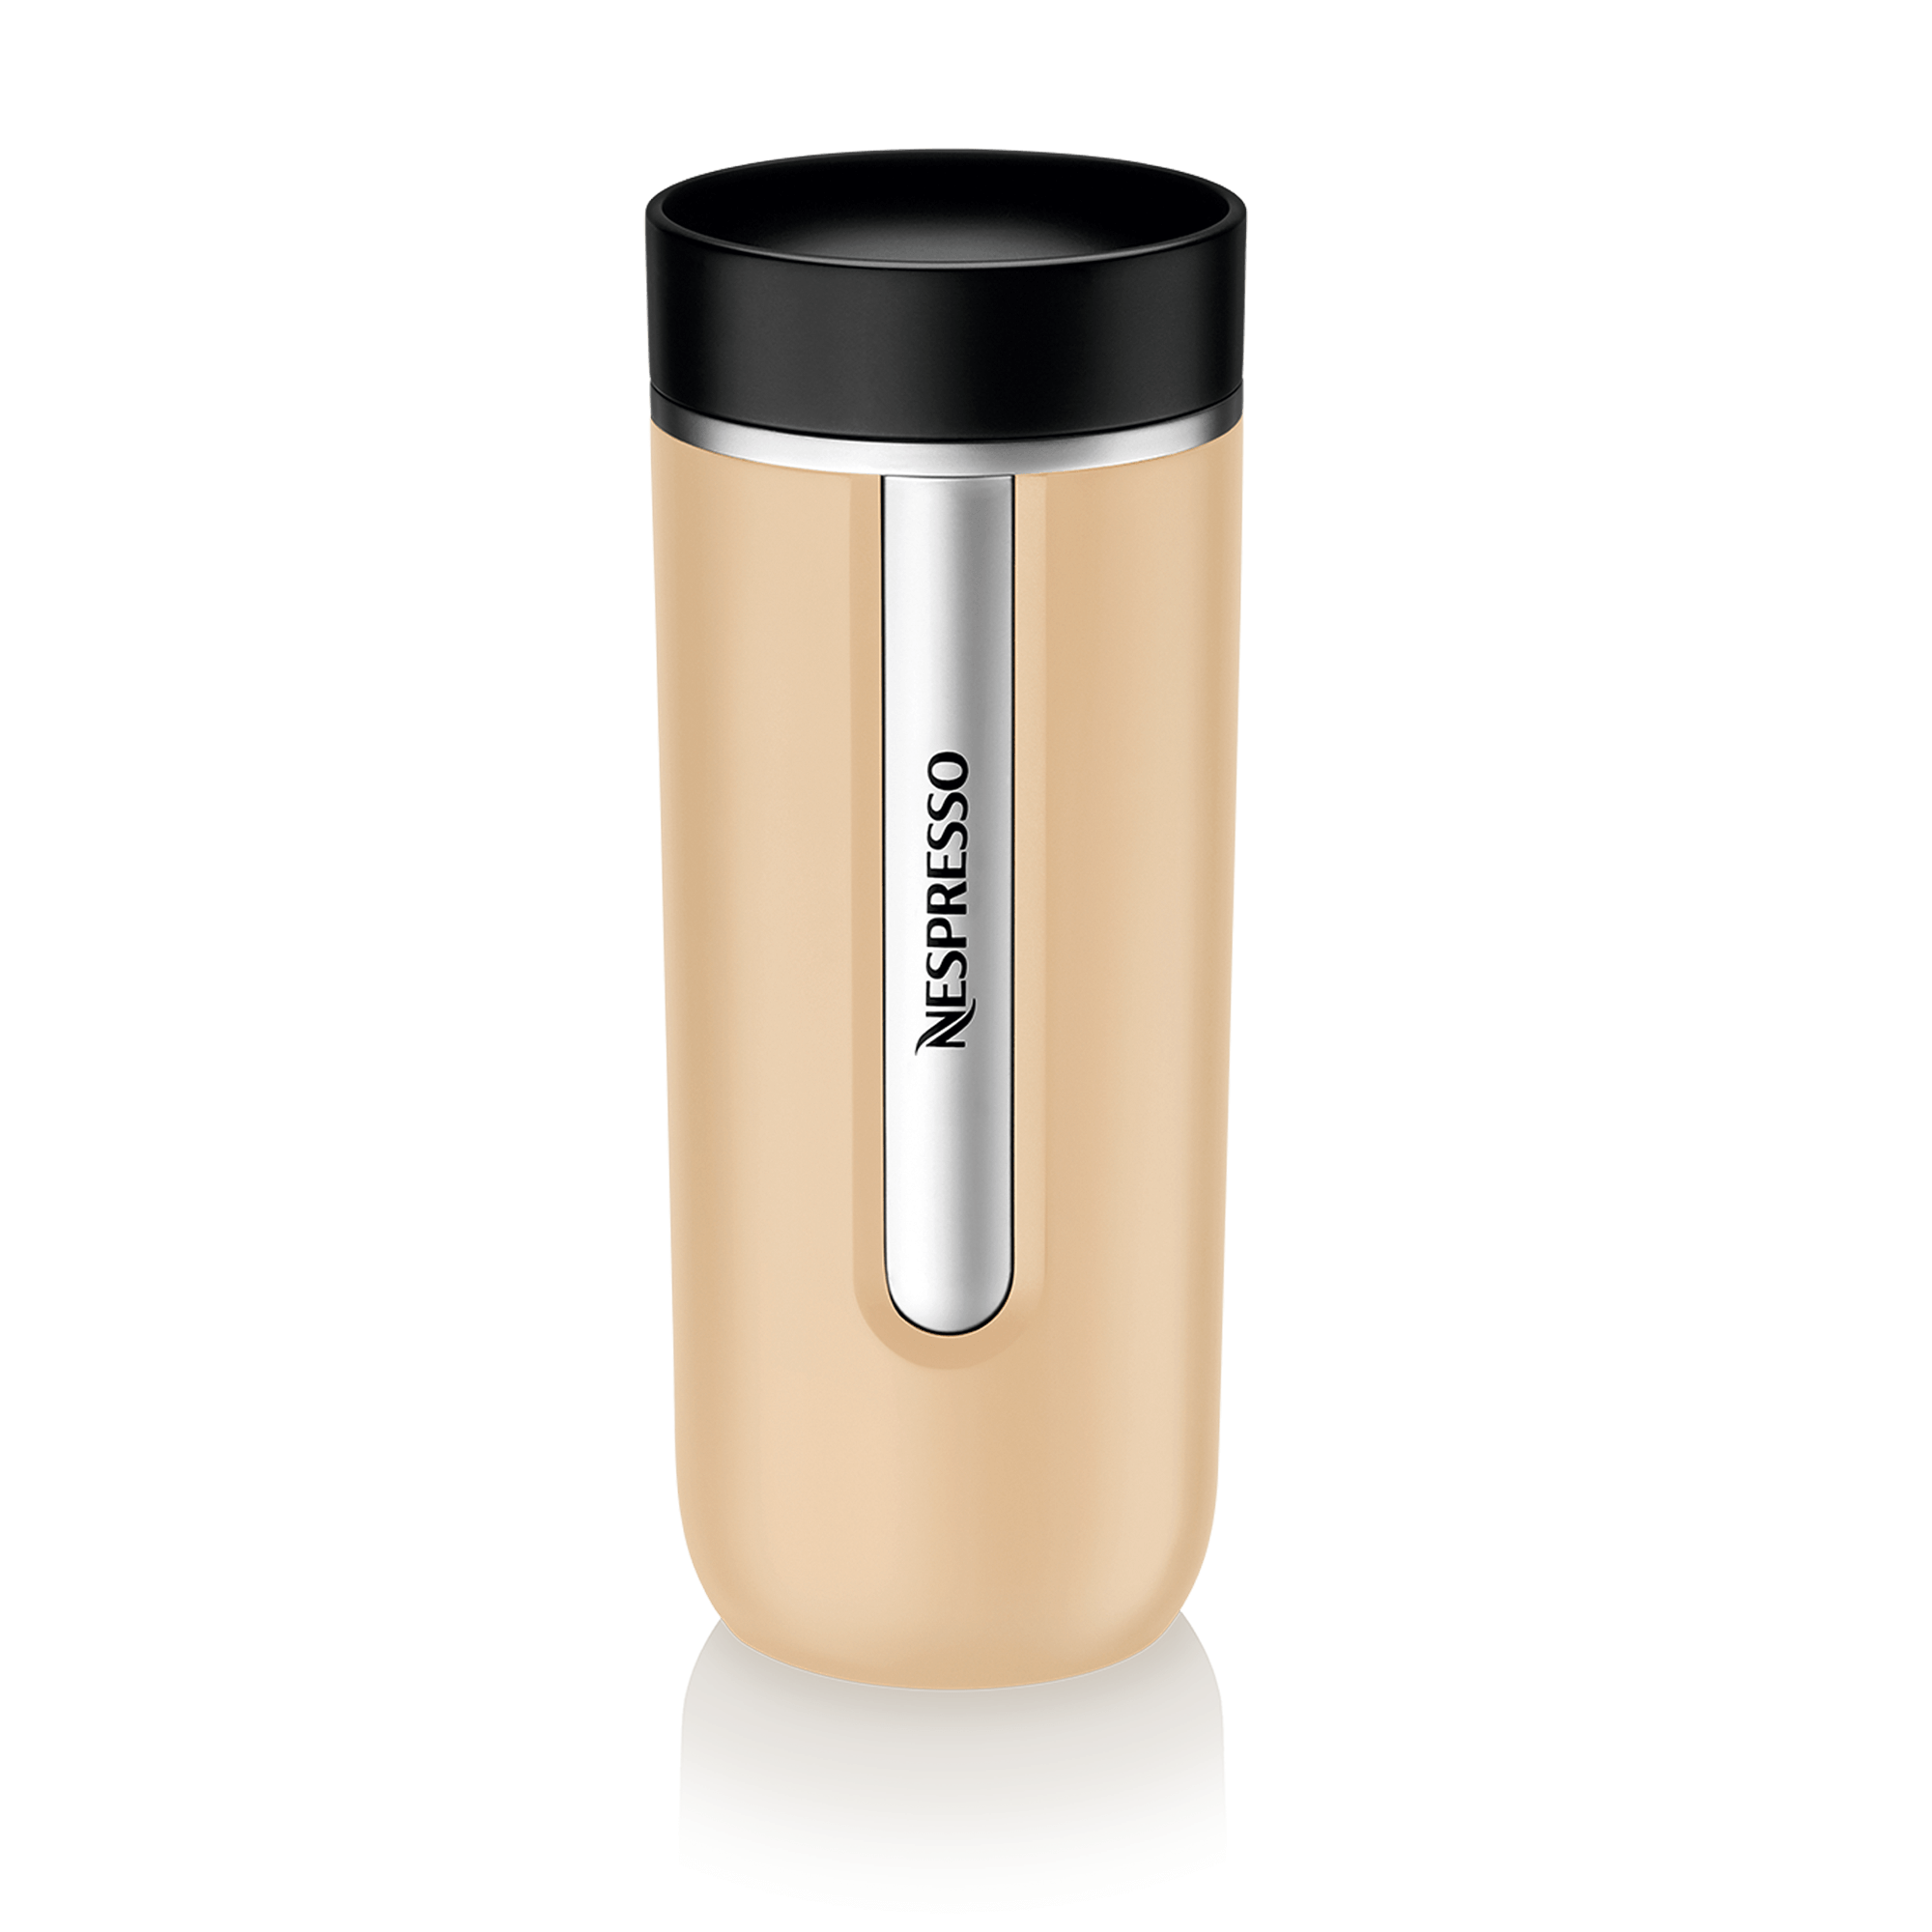 Nespresso - Consider it a coat for your Nespresso. Get our Nomad Travel Mug  and keep your coffee warm, wherever you go.